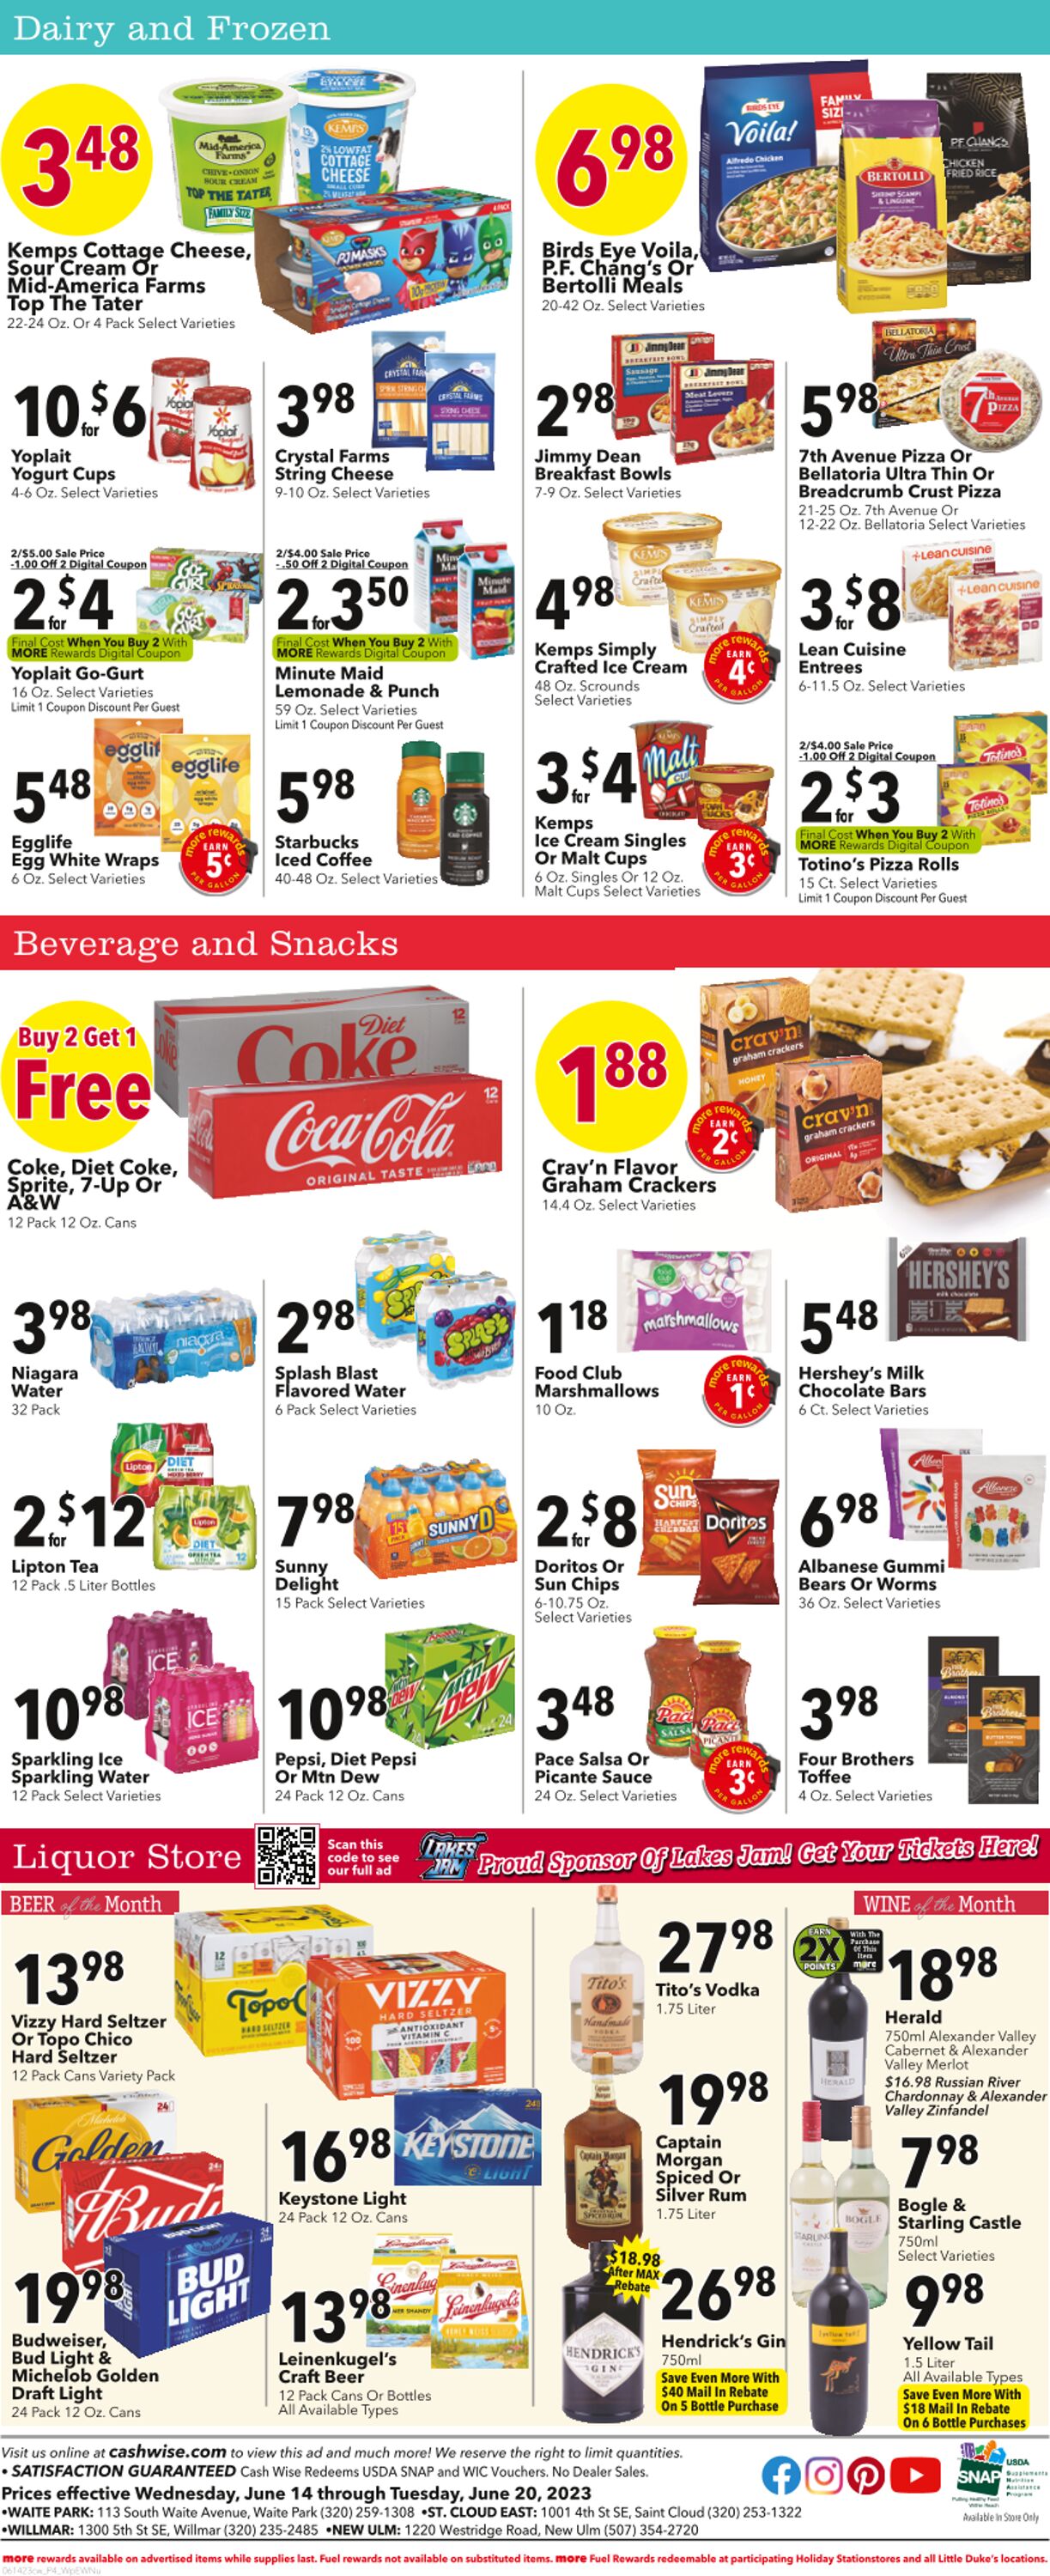 Cash Wise Weekly Ad Circular - valid 06/15-06/21/2023 (Page 4)